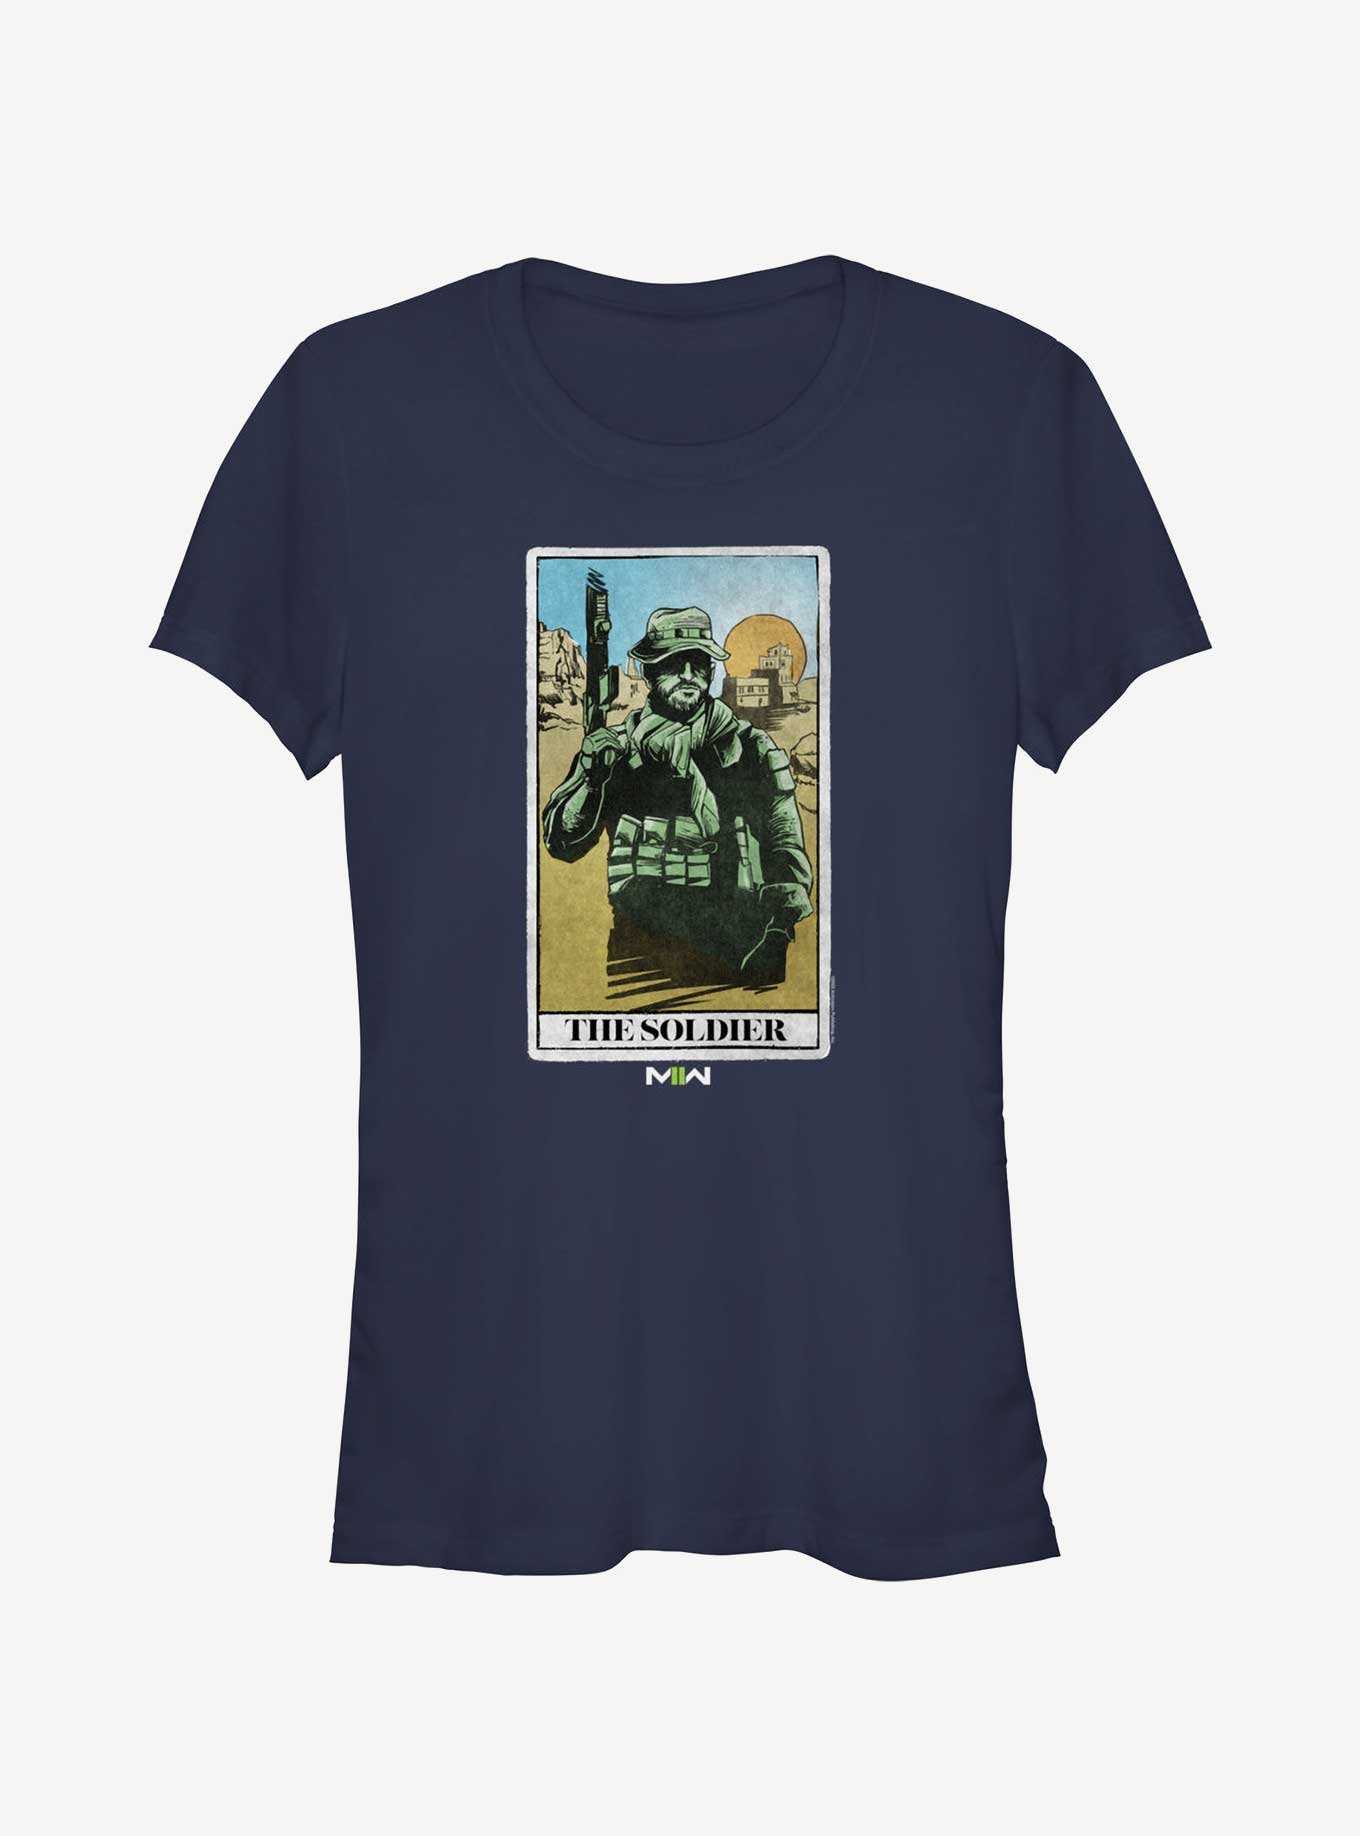 Call of Duty The Soldier Card Girls T-Shirt, , hi-res